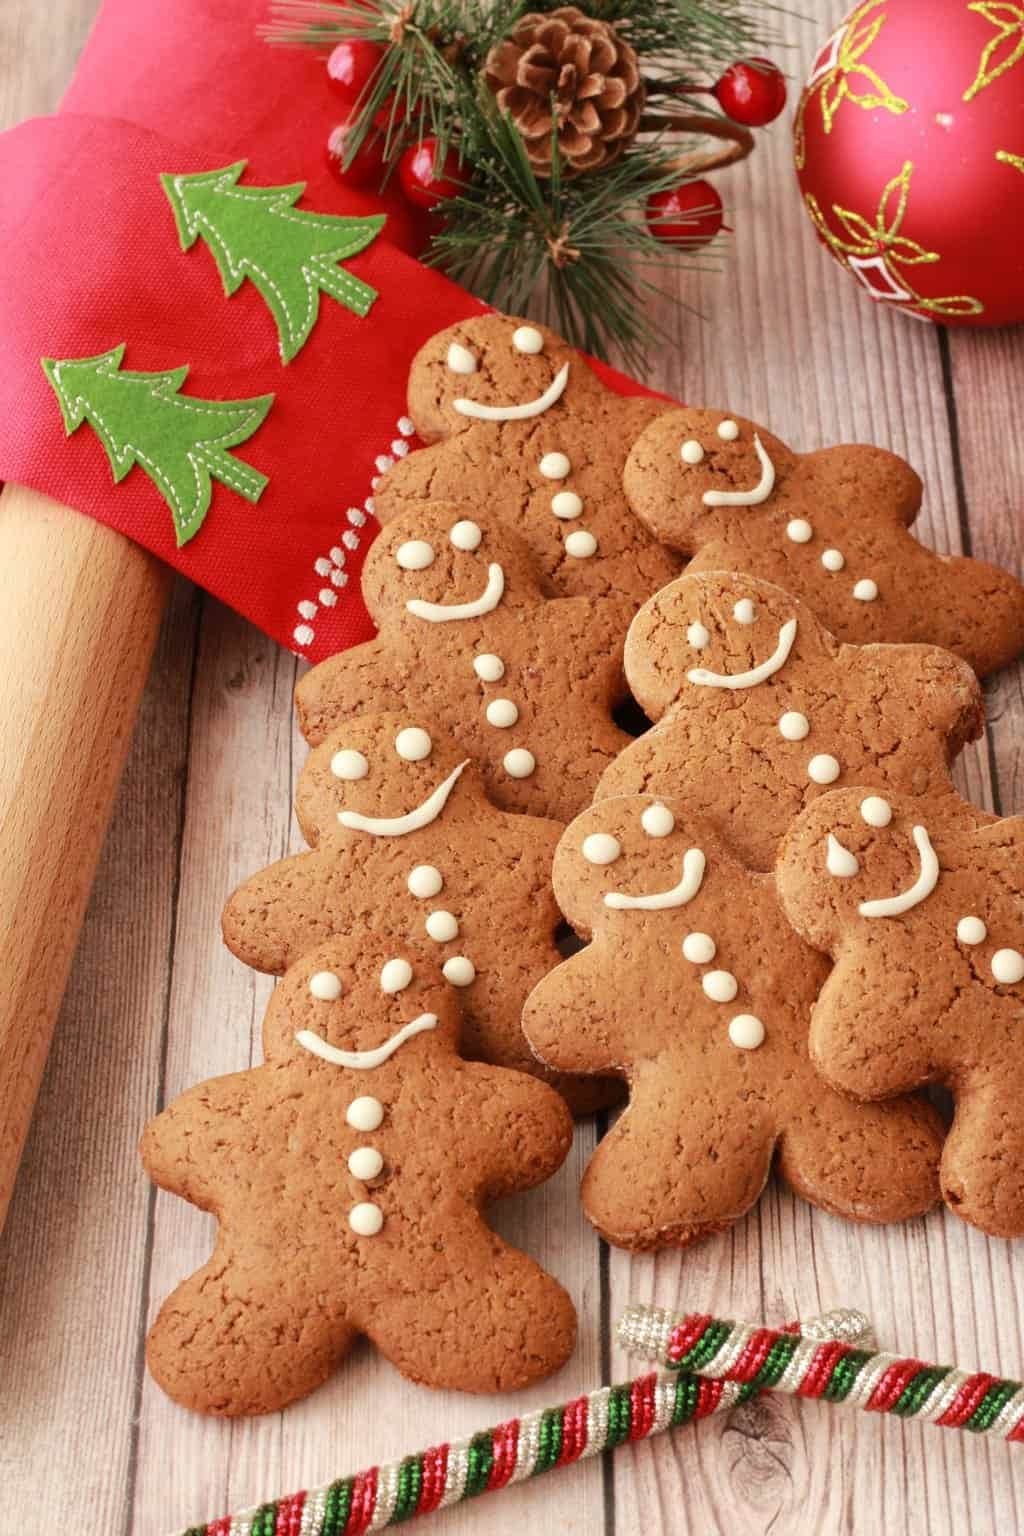 Bunch of gingerbread cookies on a decorated holiday table.